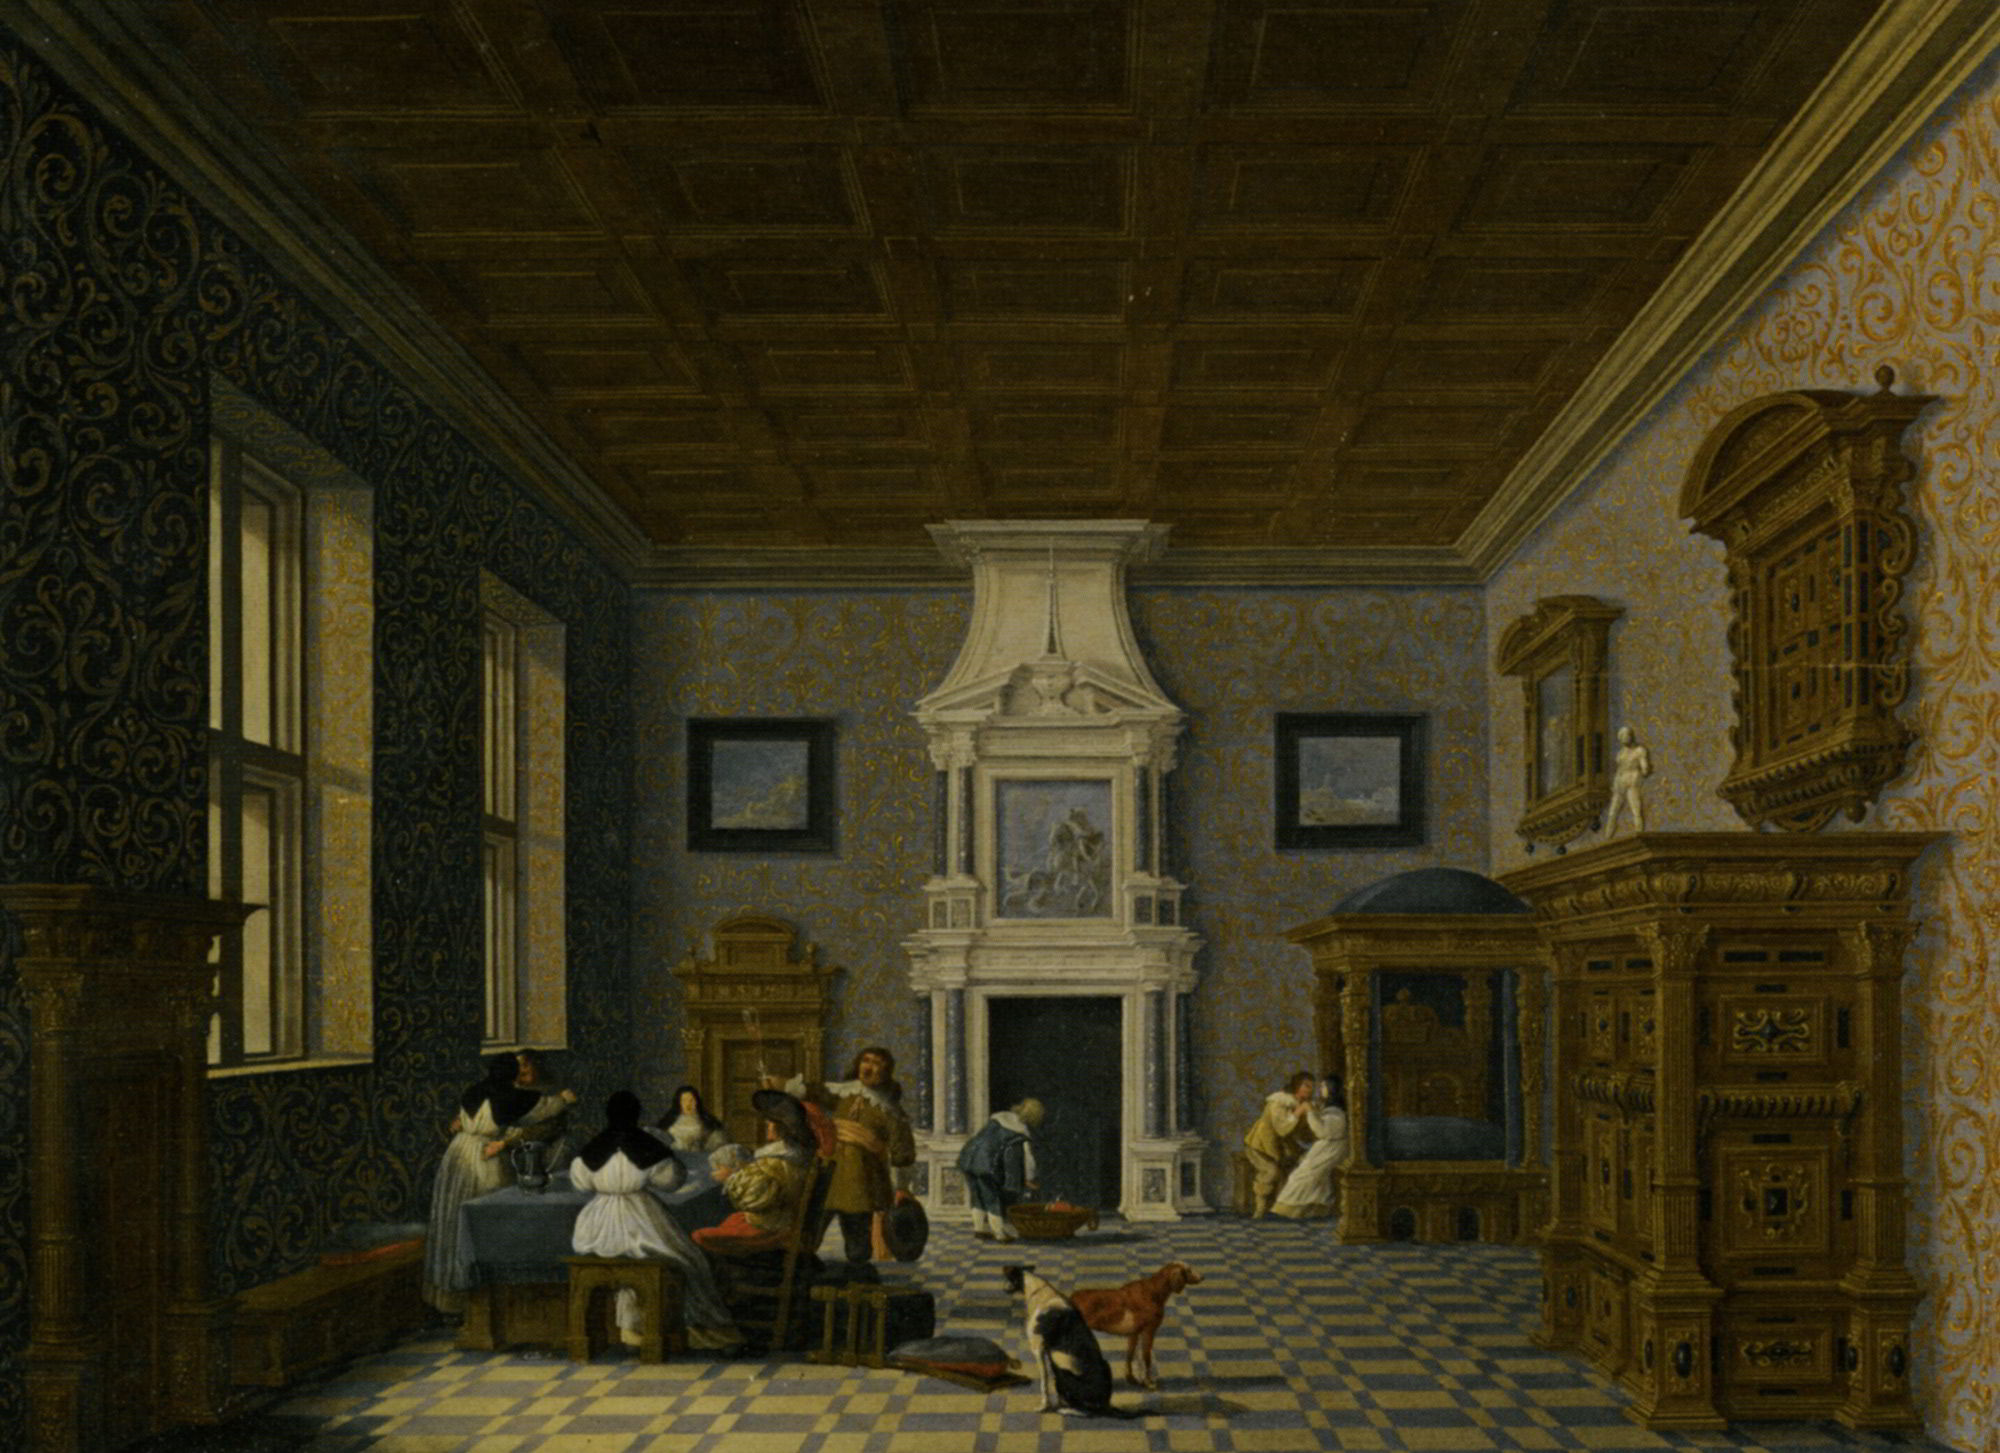 A Palace Interior with Cavaliers Cavorting with Nuns by Dirck van Delen